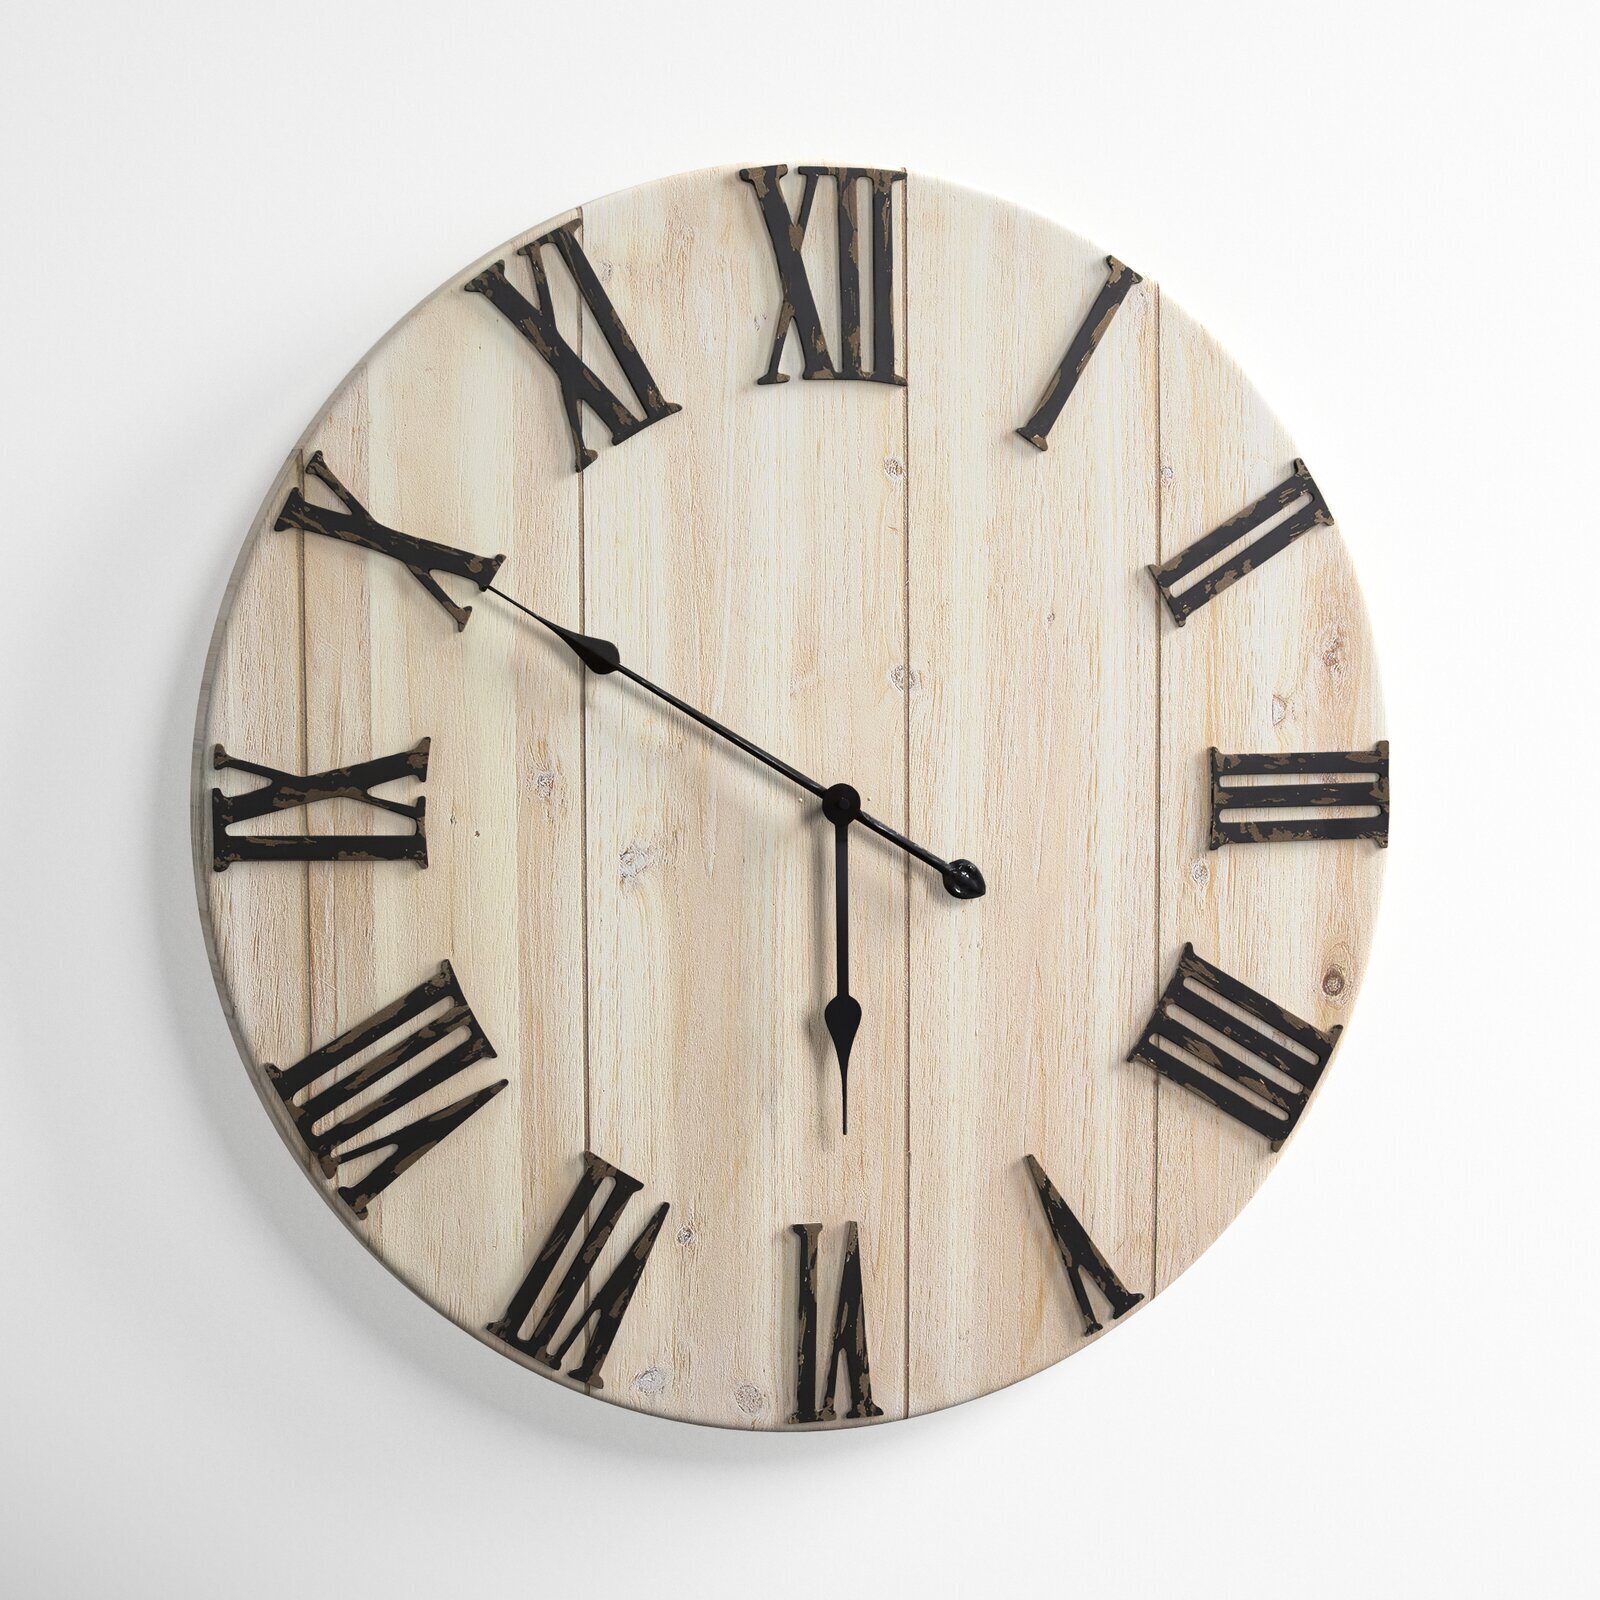 Wooden French wall clock